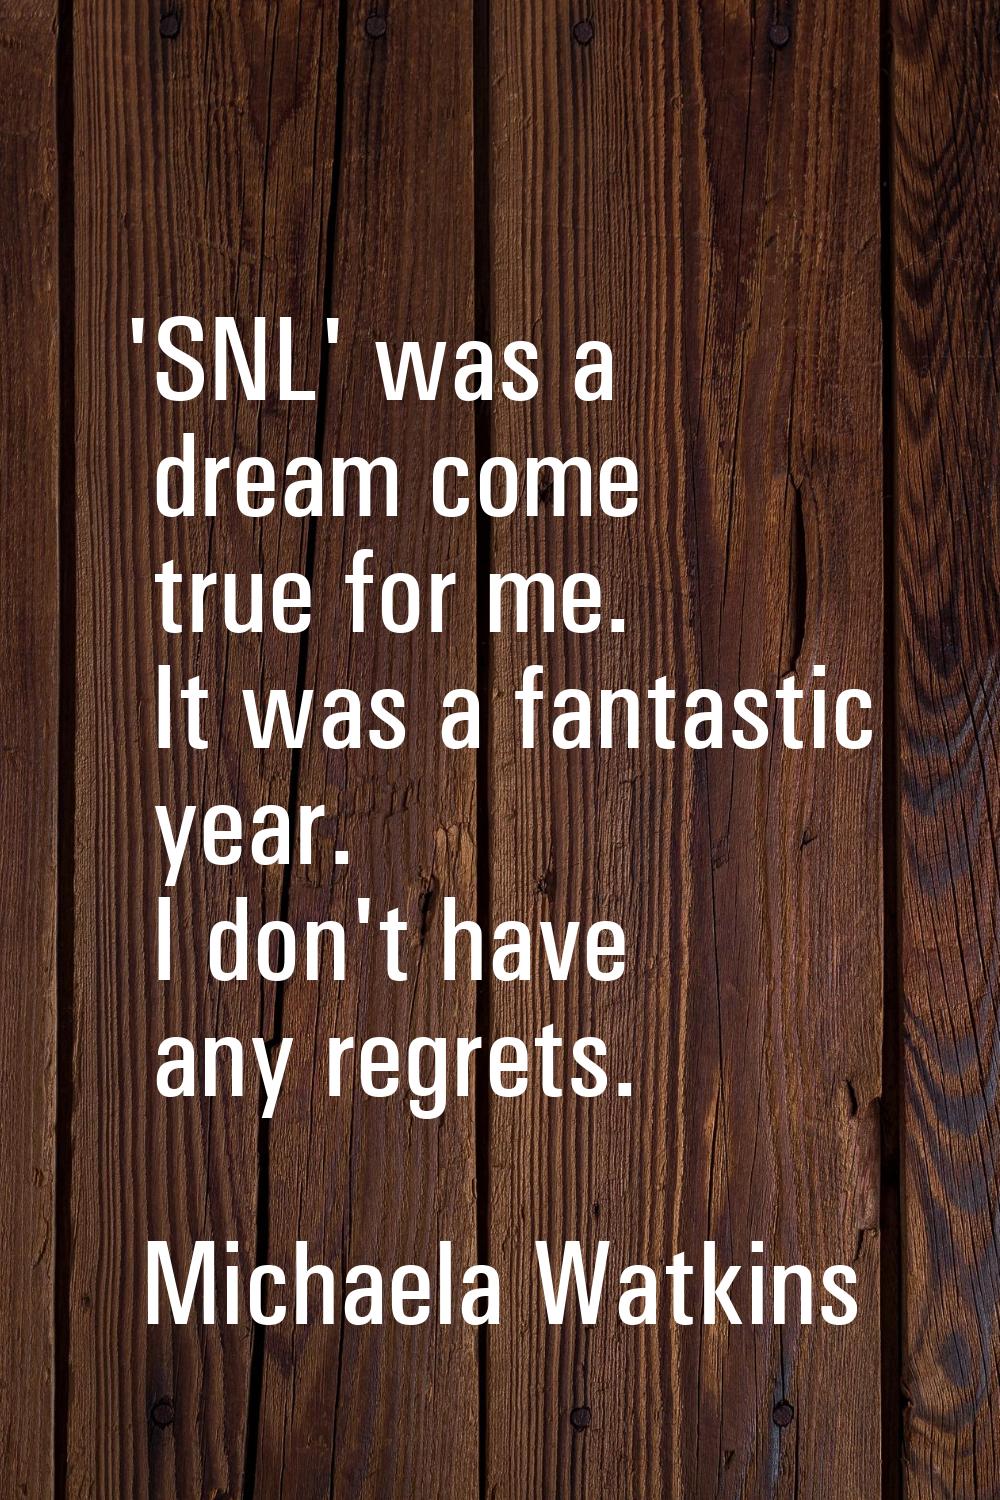 'SNL' was a dream come true for me. It was a fantastic year. I don't have any regrets.